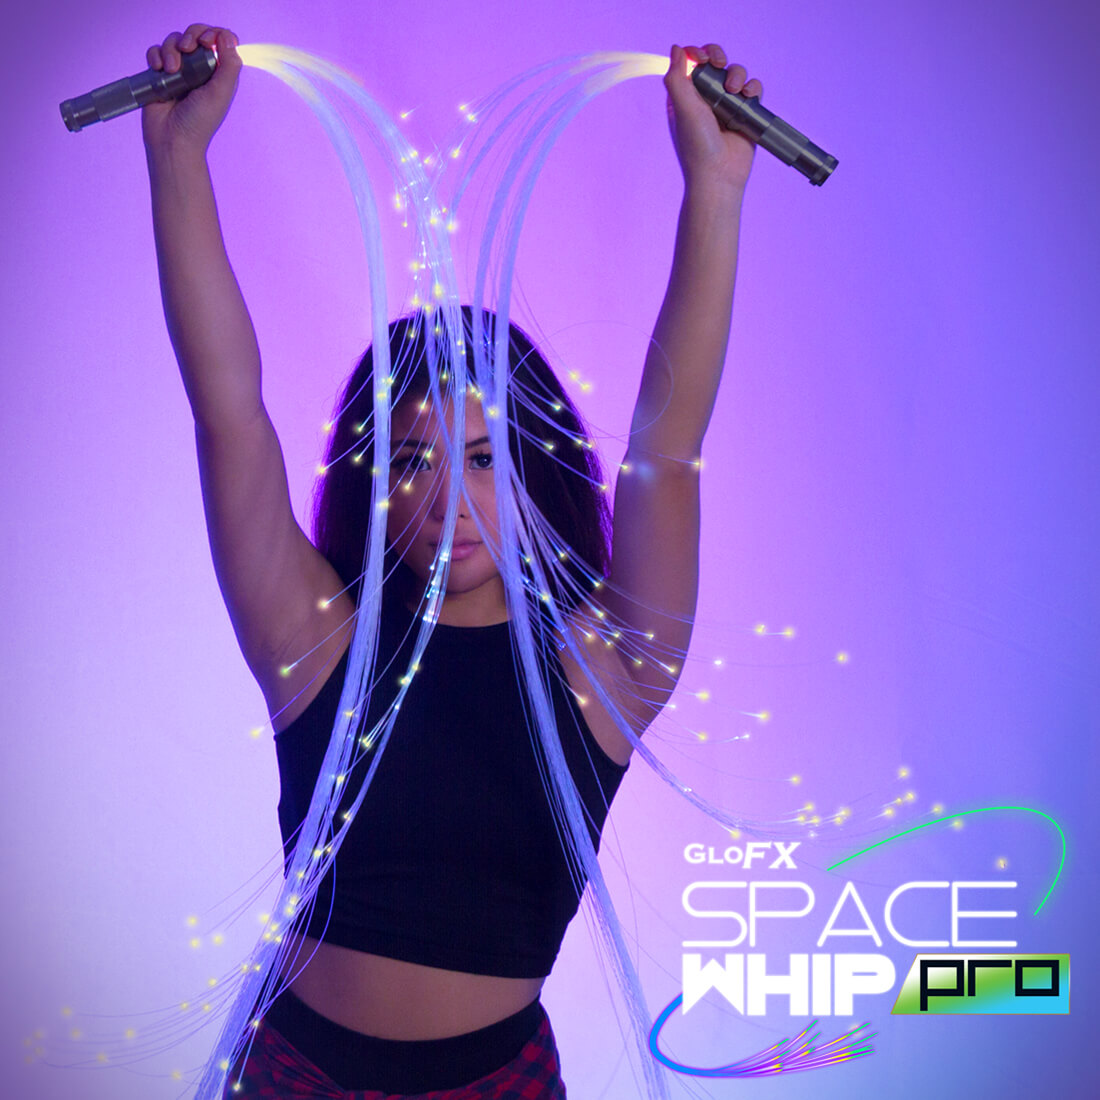 GloFX Space Whip Pro